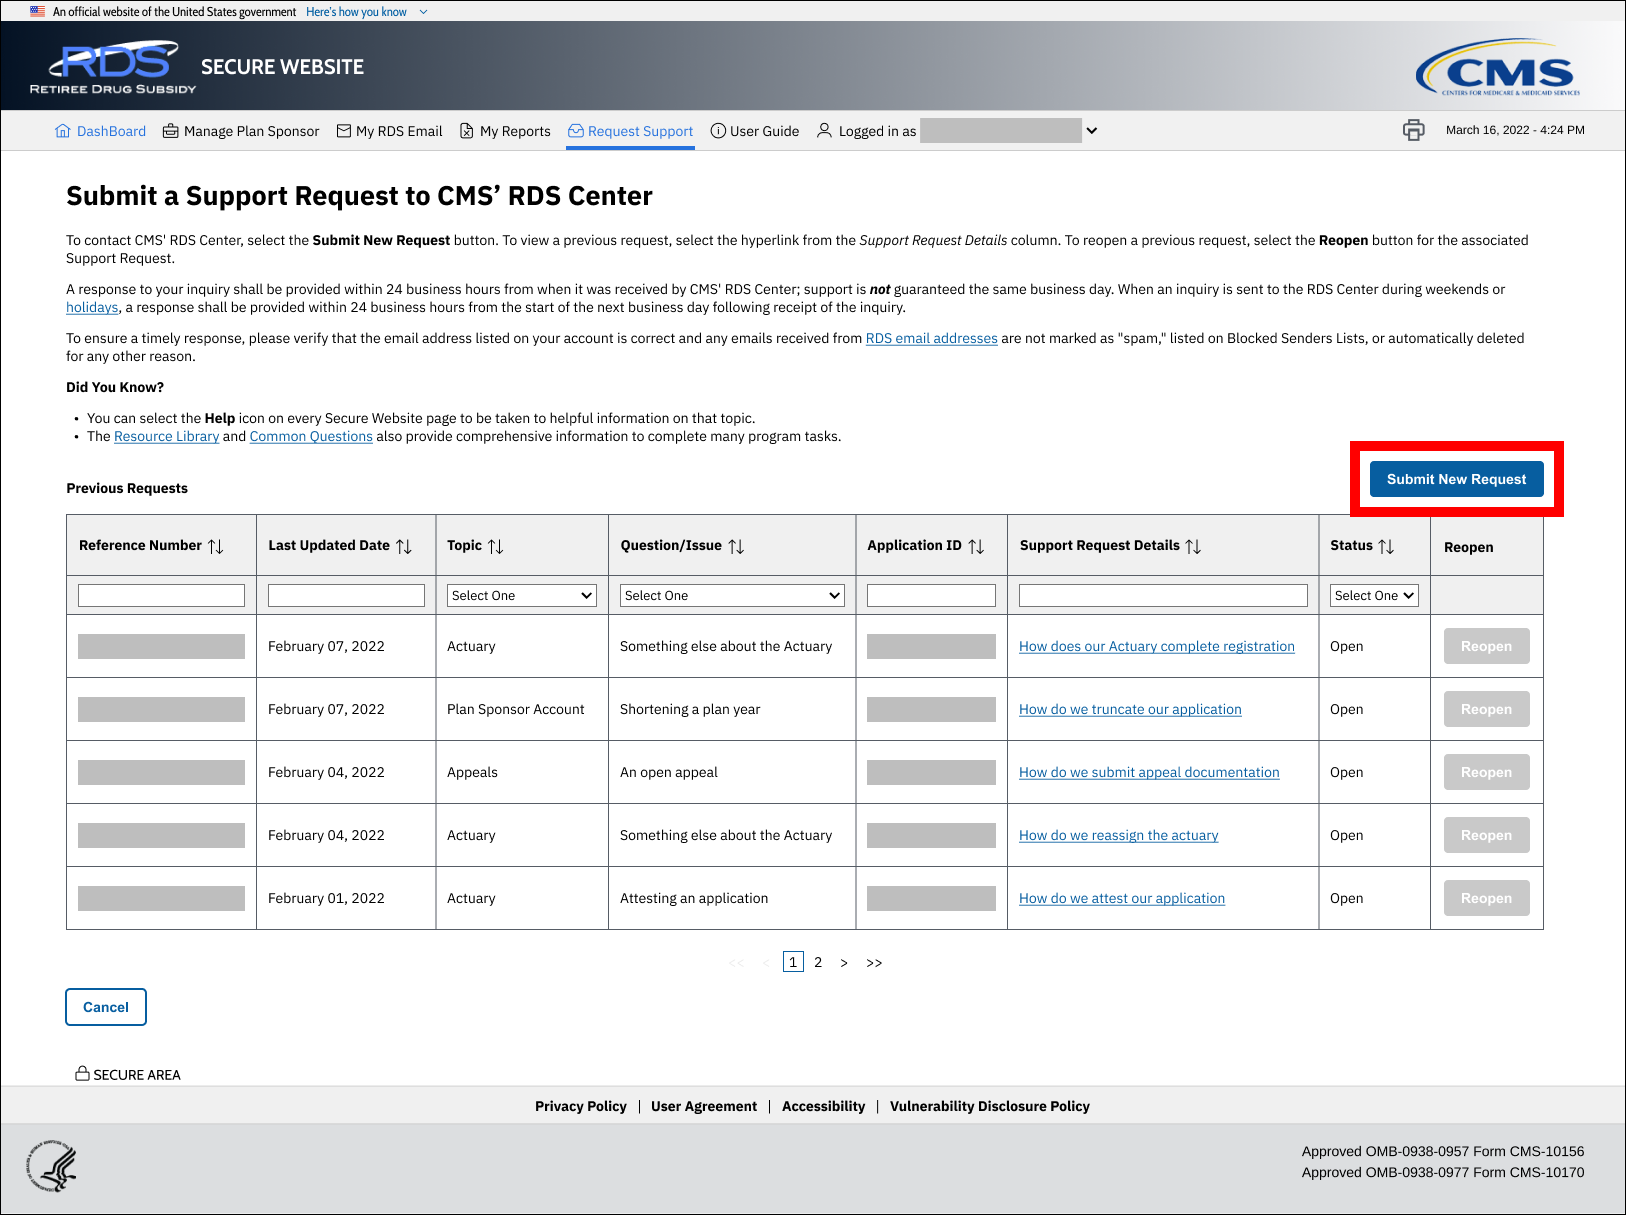 Submit a Support Request to CMS' RDS Center page with sample data. Submit New Request button is highlighted.